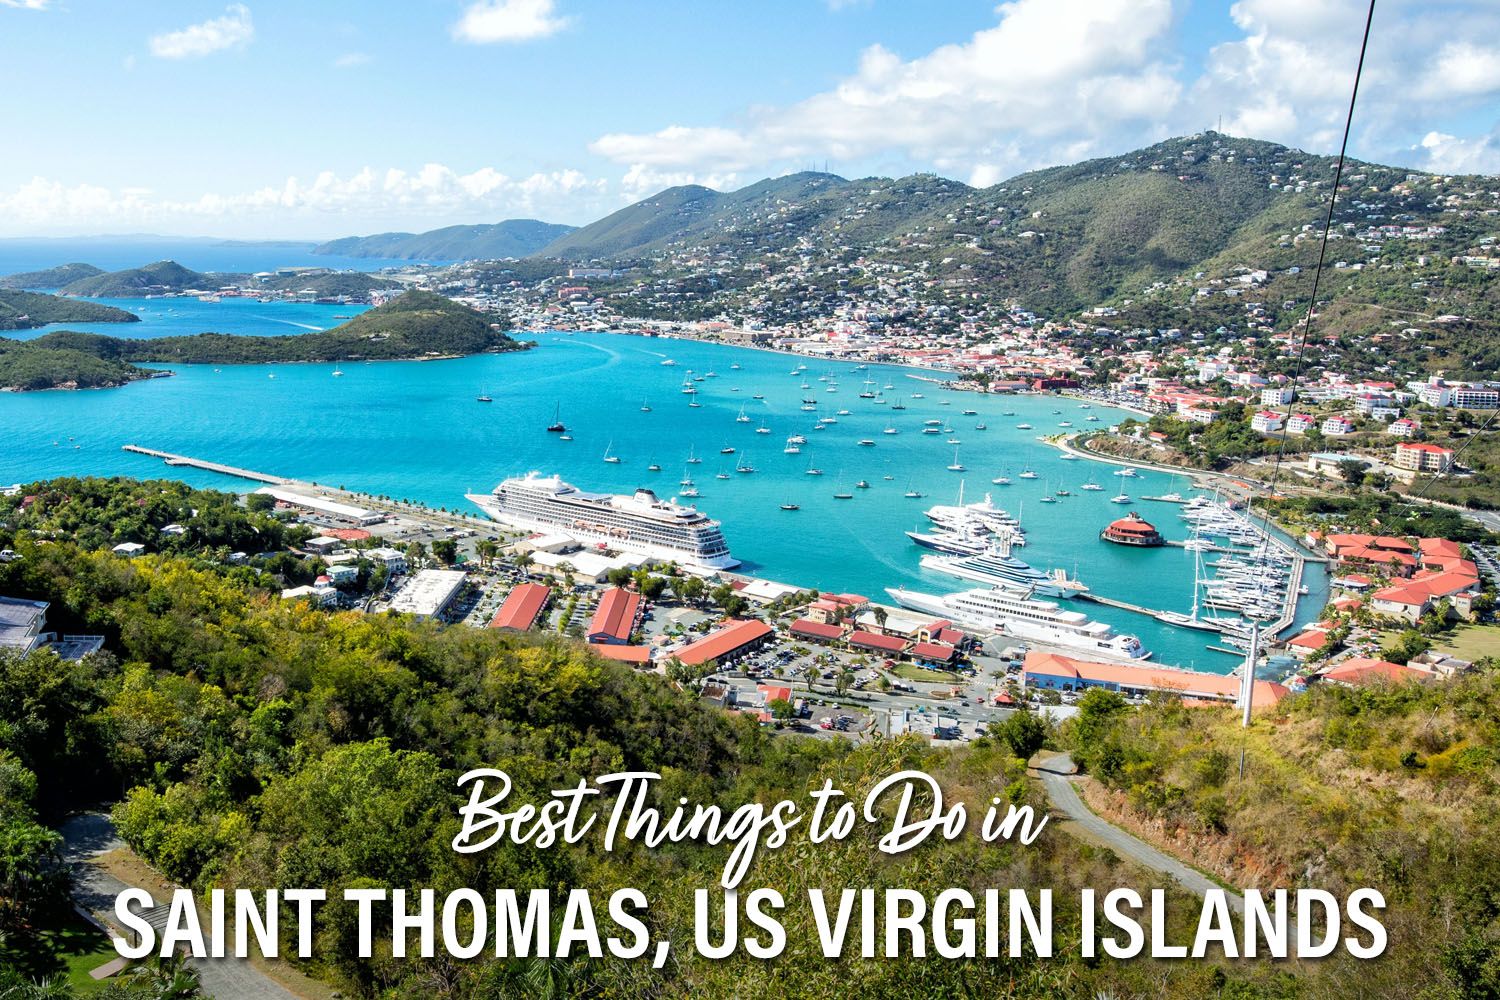 Best Things to Do in Saint Thomas